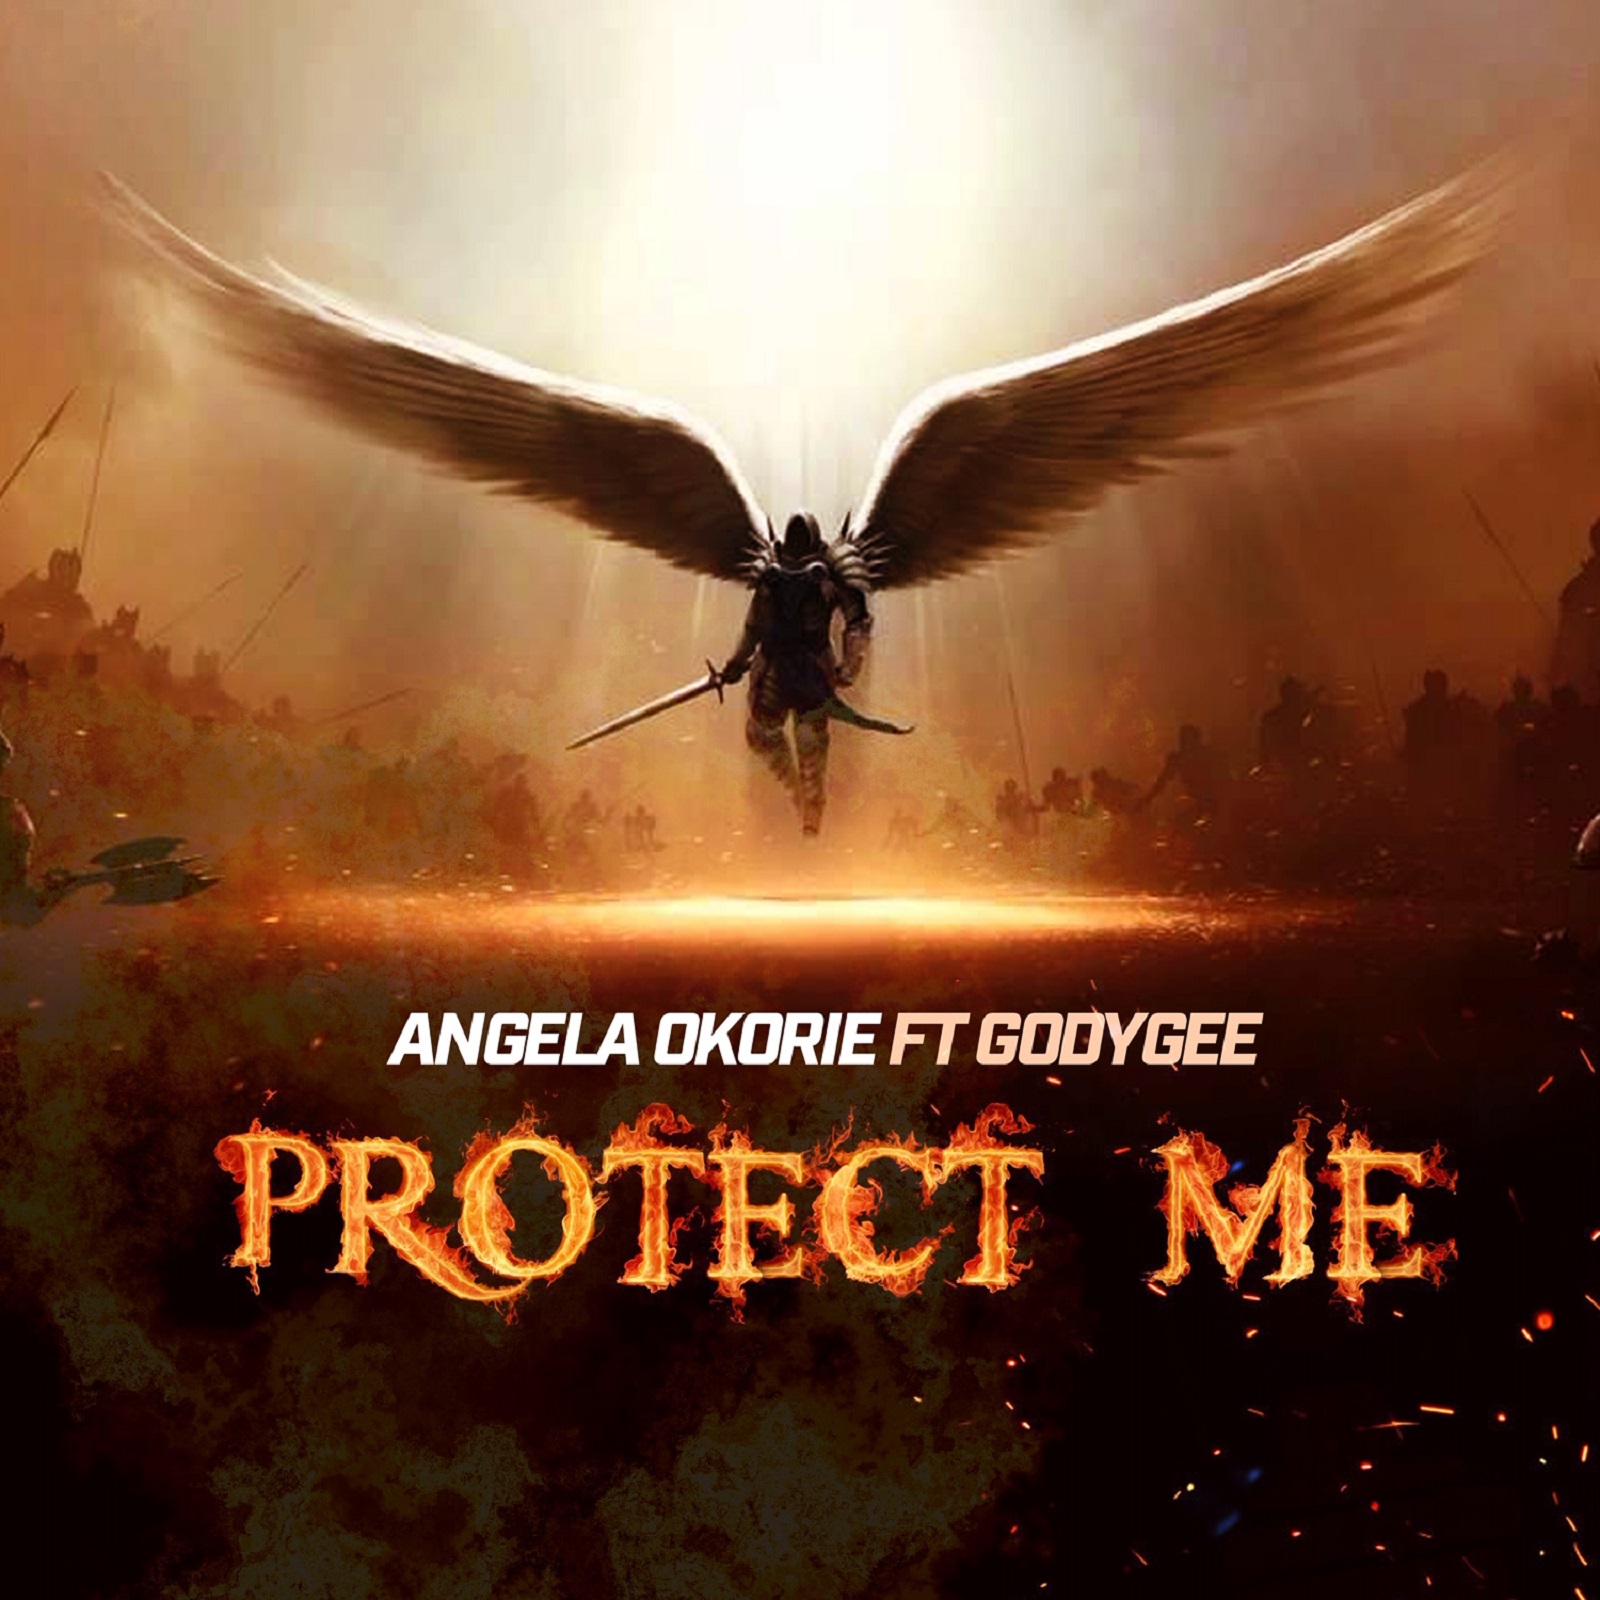 Angela Okorie serves us with “Protect Me” featuring Godygee